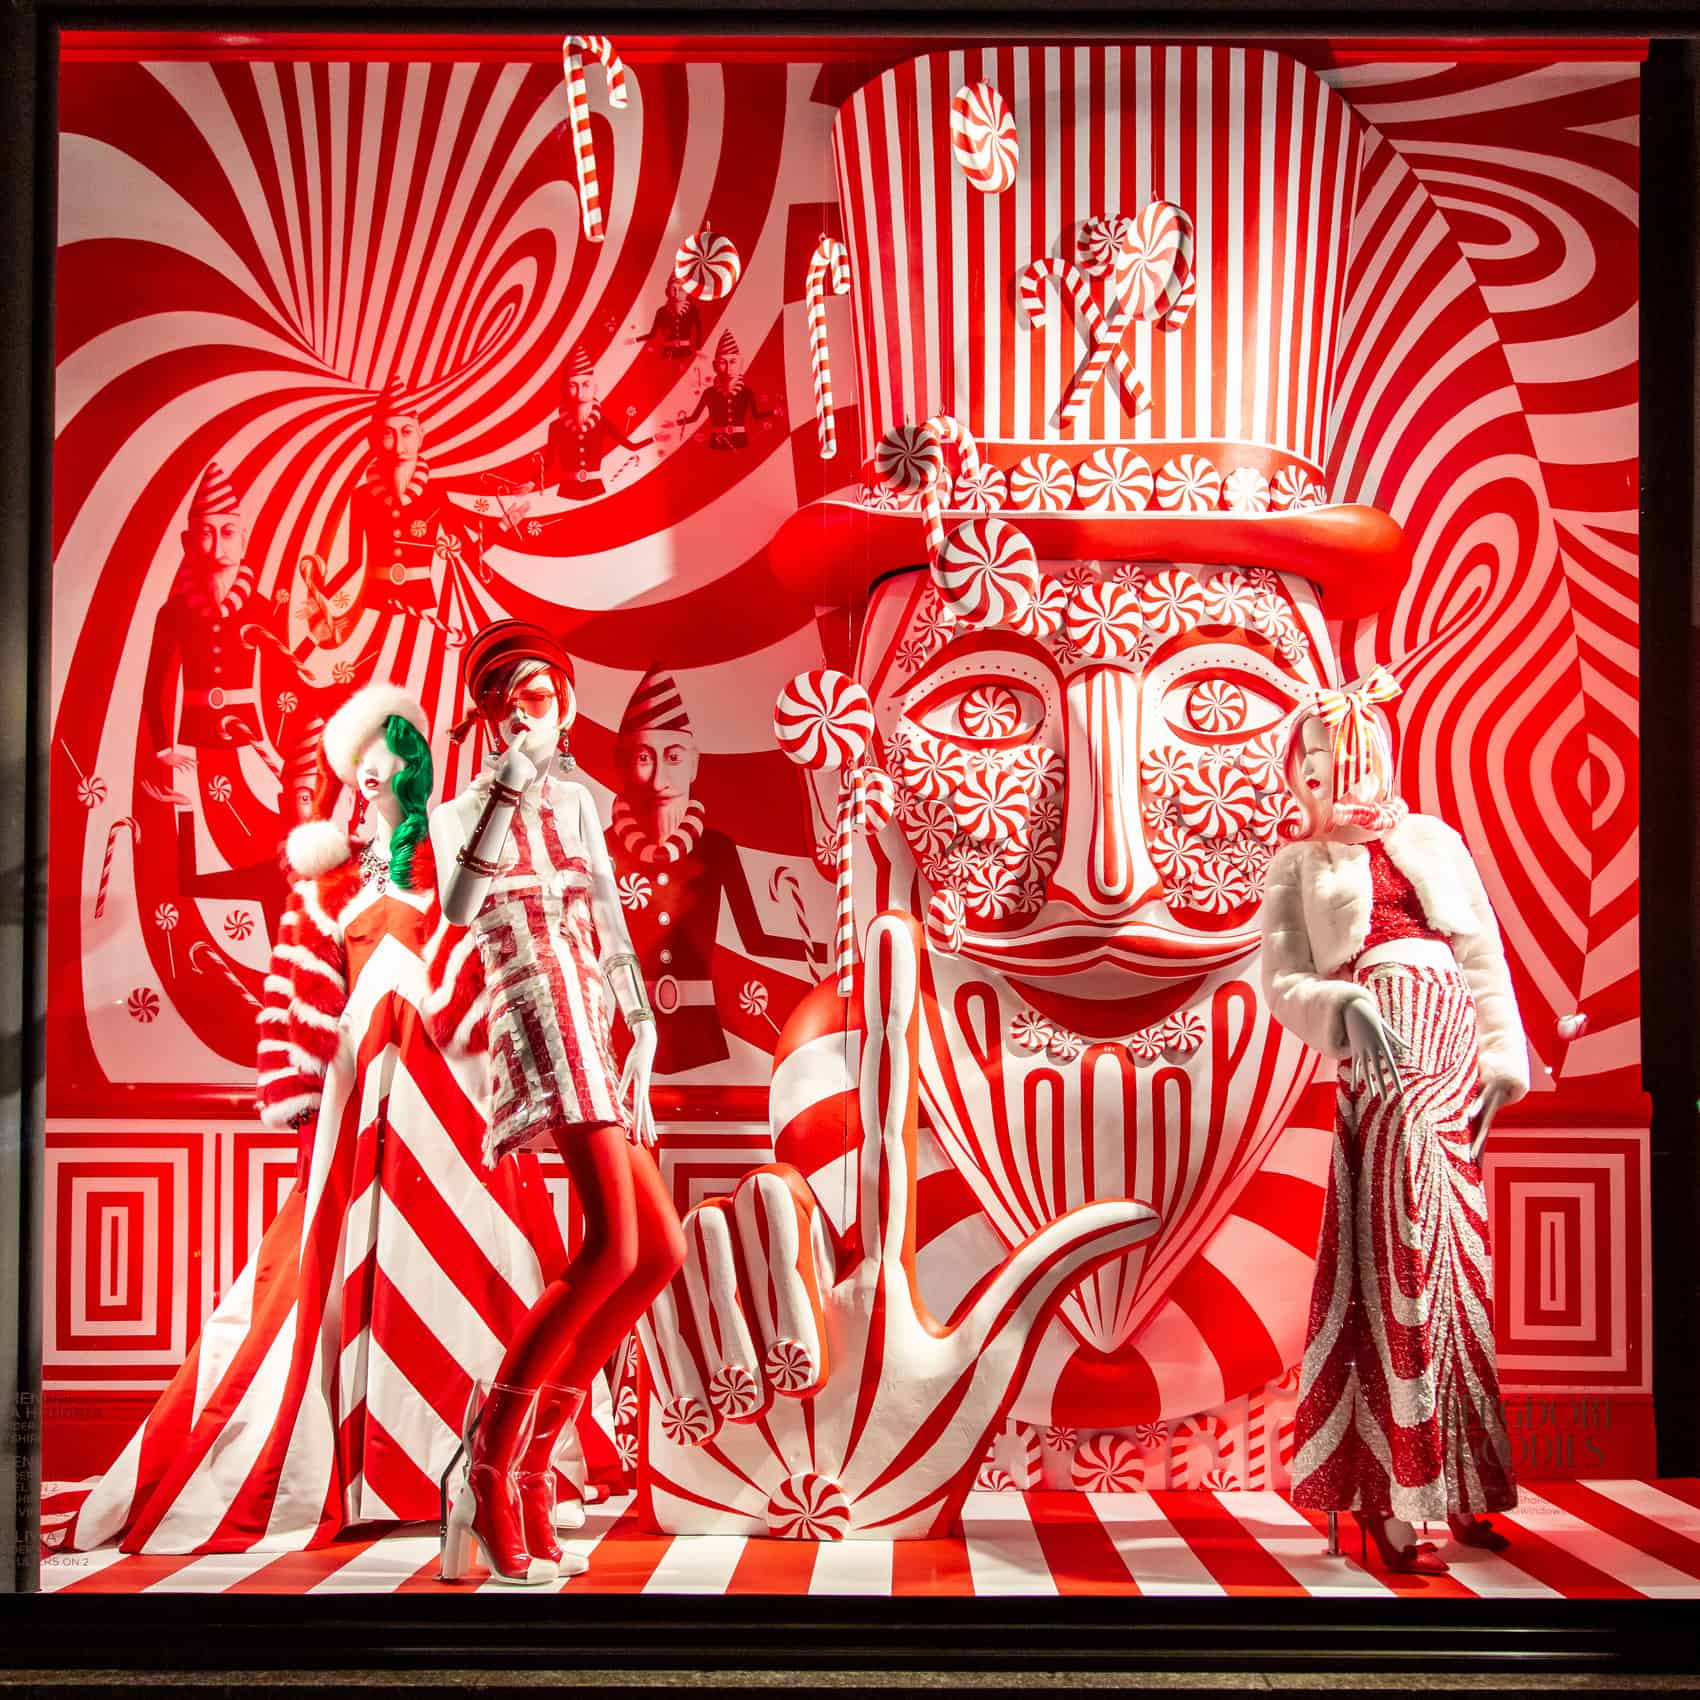 THE 2021 HOLIDAY WINDOWS 🎹 Introducing Bergdorf Goodman's fantastical holiday  windows! This year's theme, The Present Moment, features…